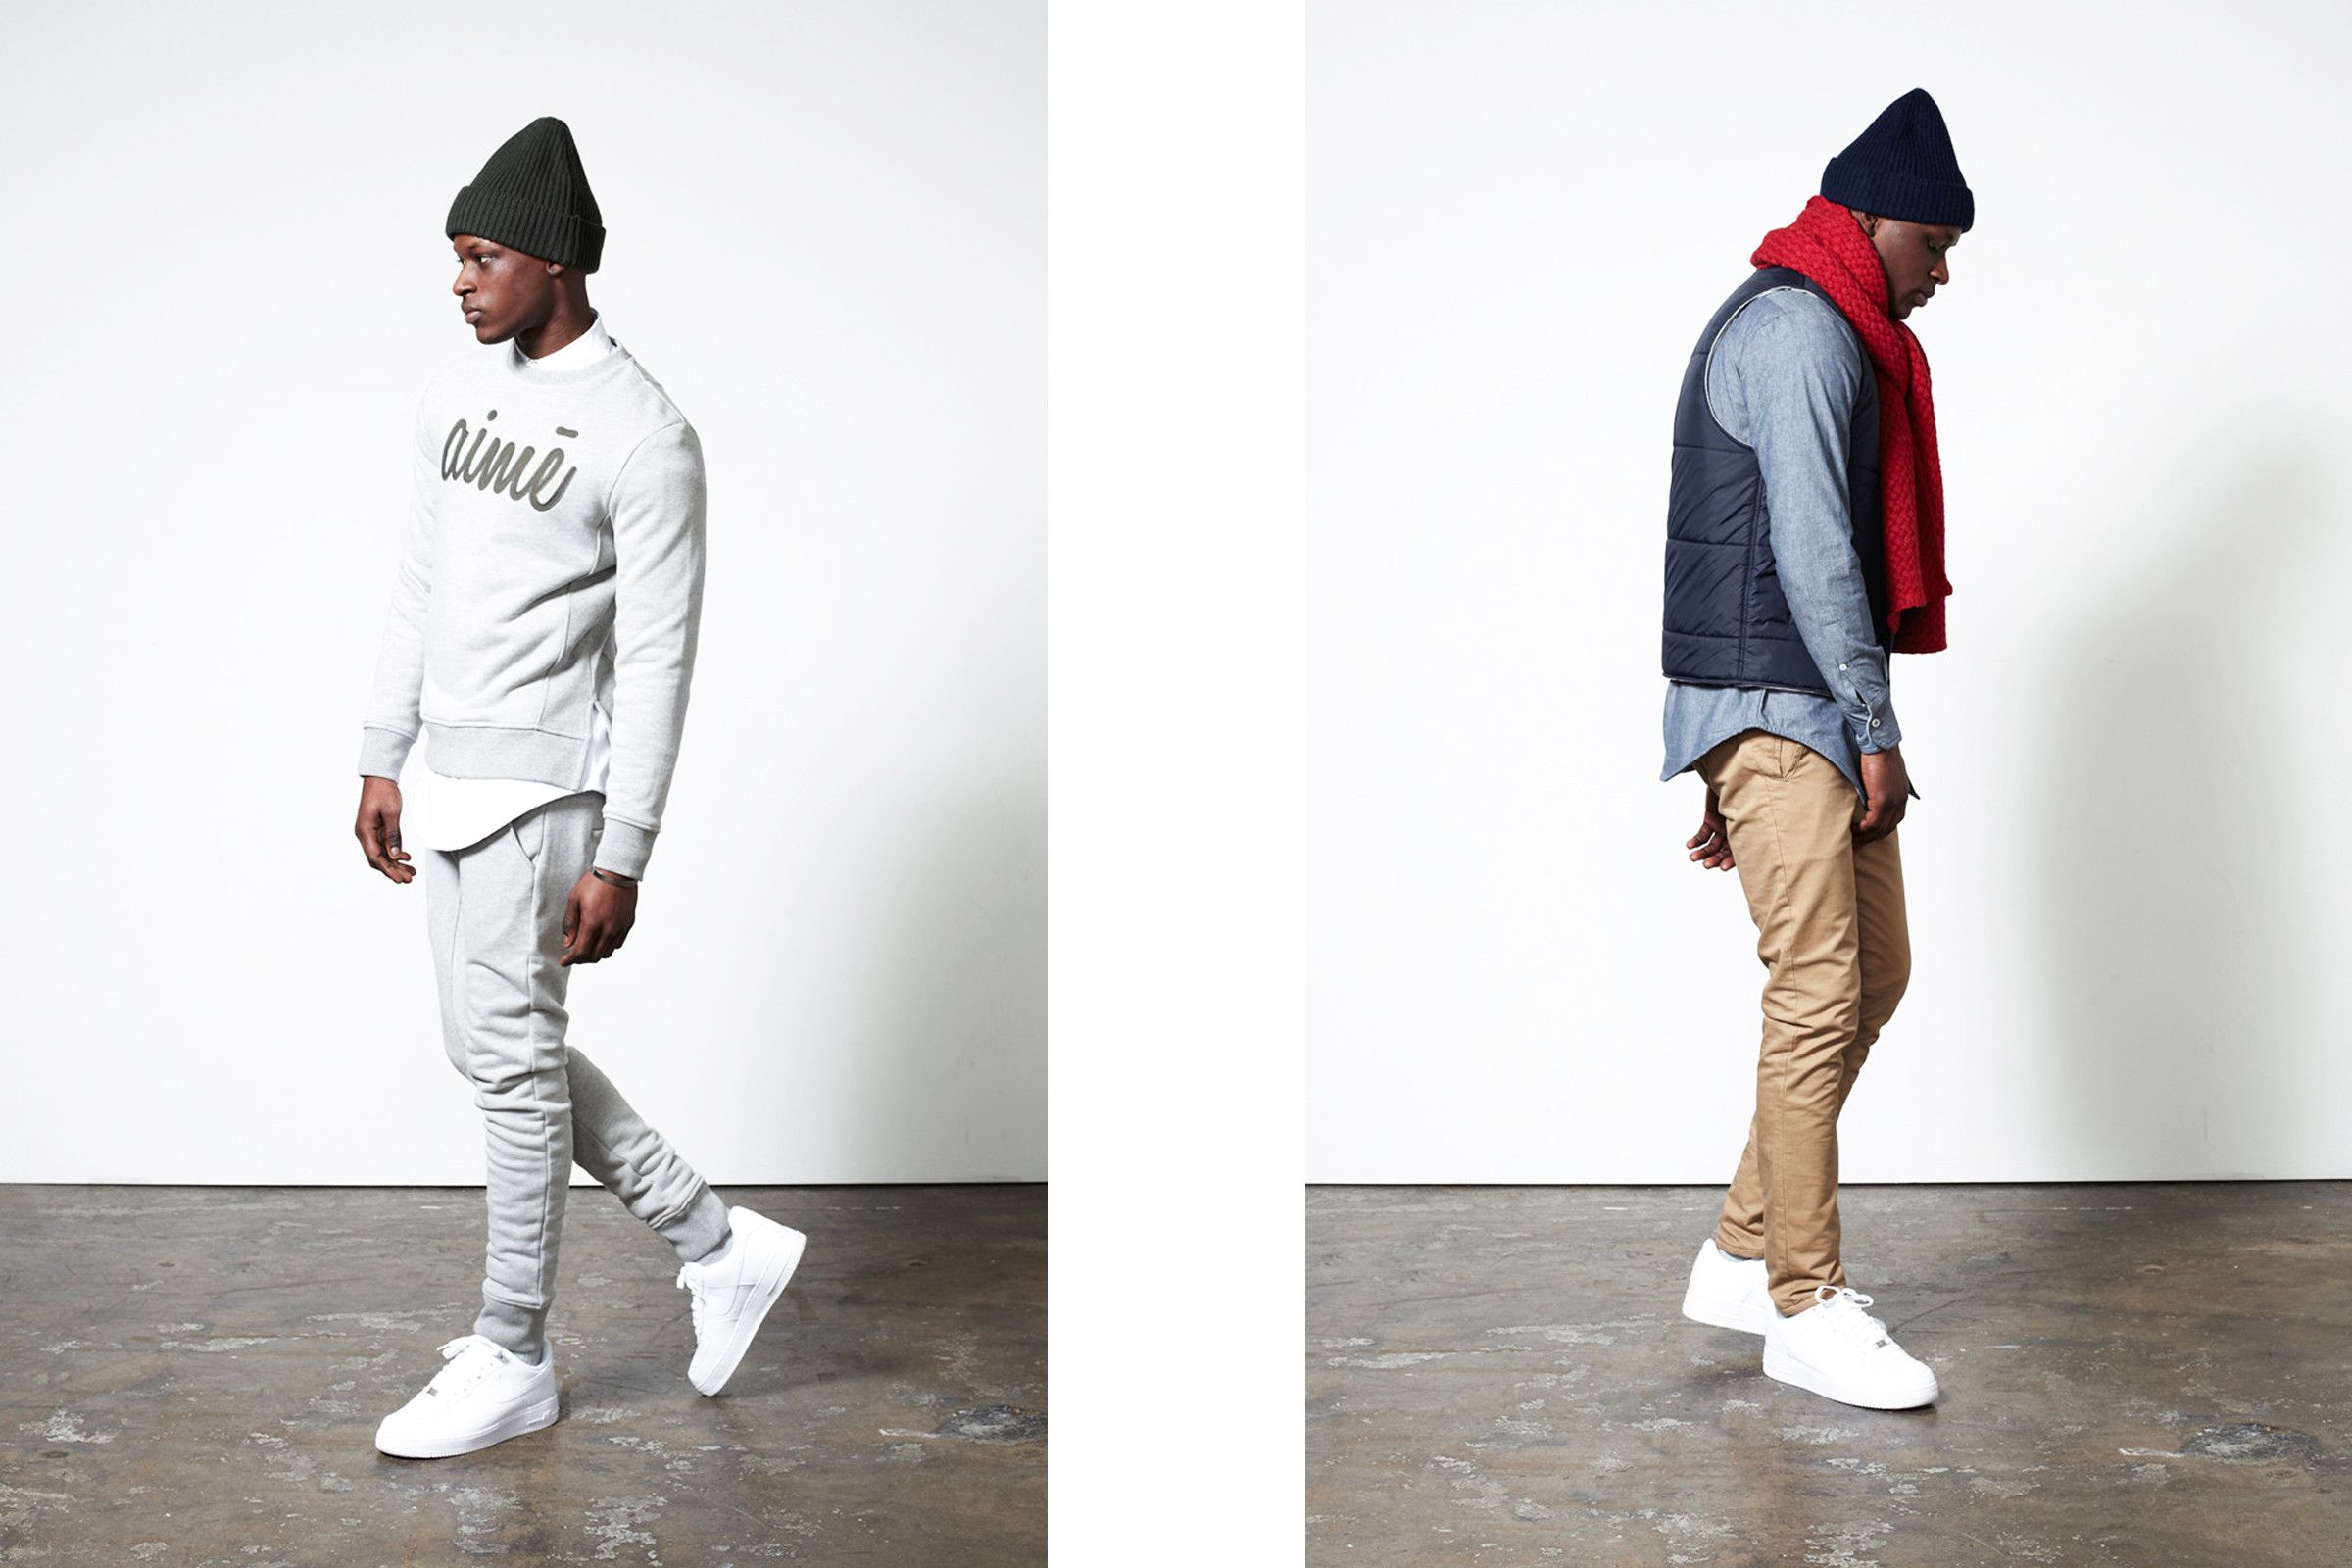 Aimé Leon Dore Is The Hypebeast-Approved Brand That Thrives By